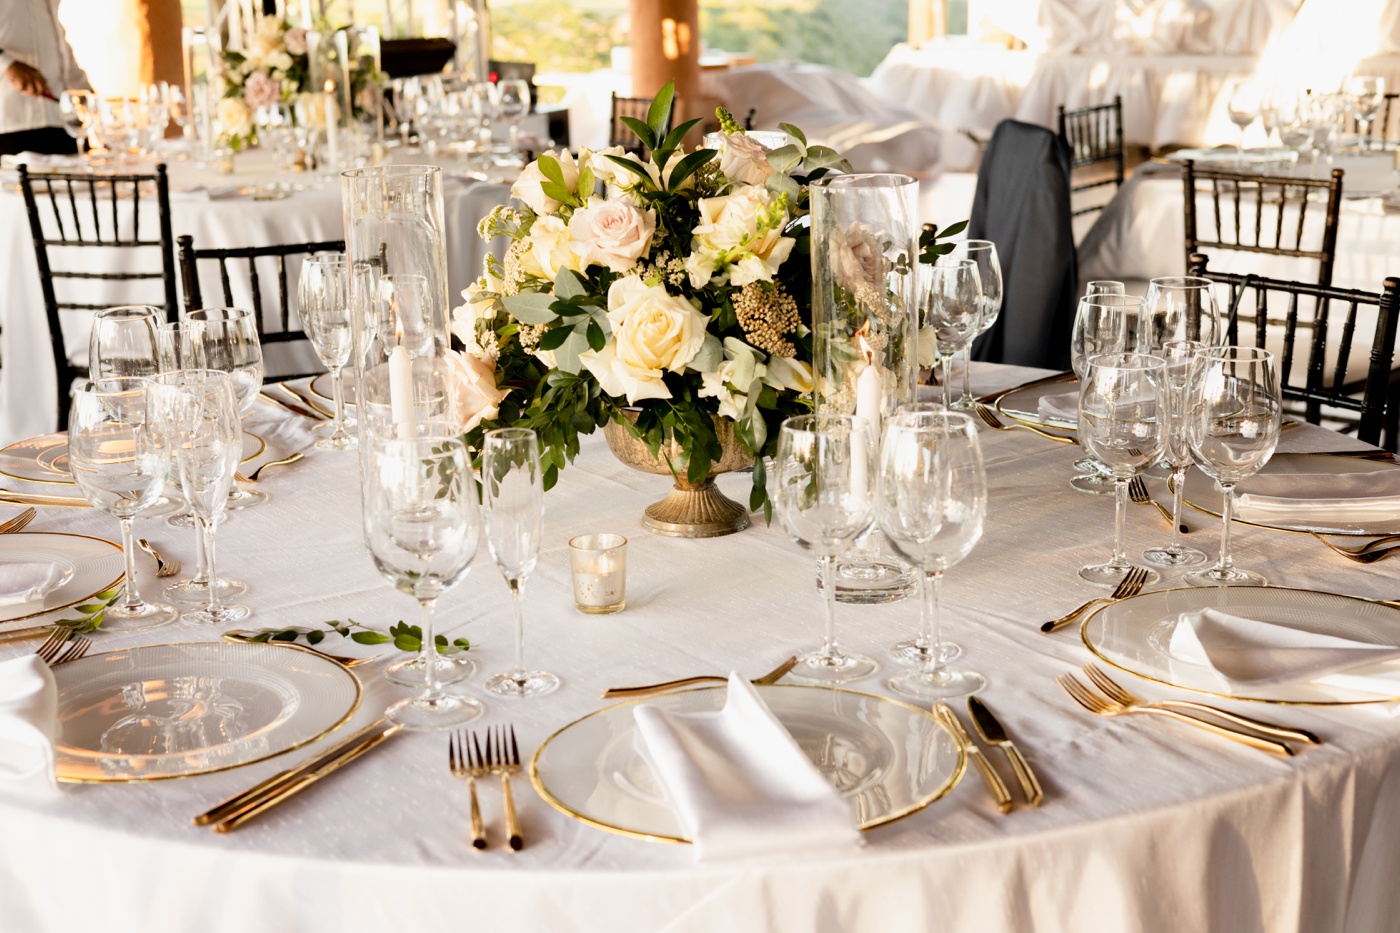 Wedding reception table with white linens, gold cutlery, and a gold bud vase filled with pink and white flowers